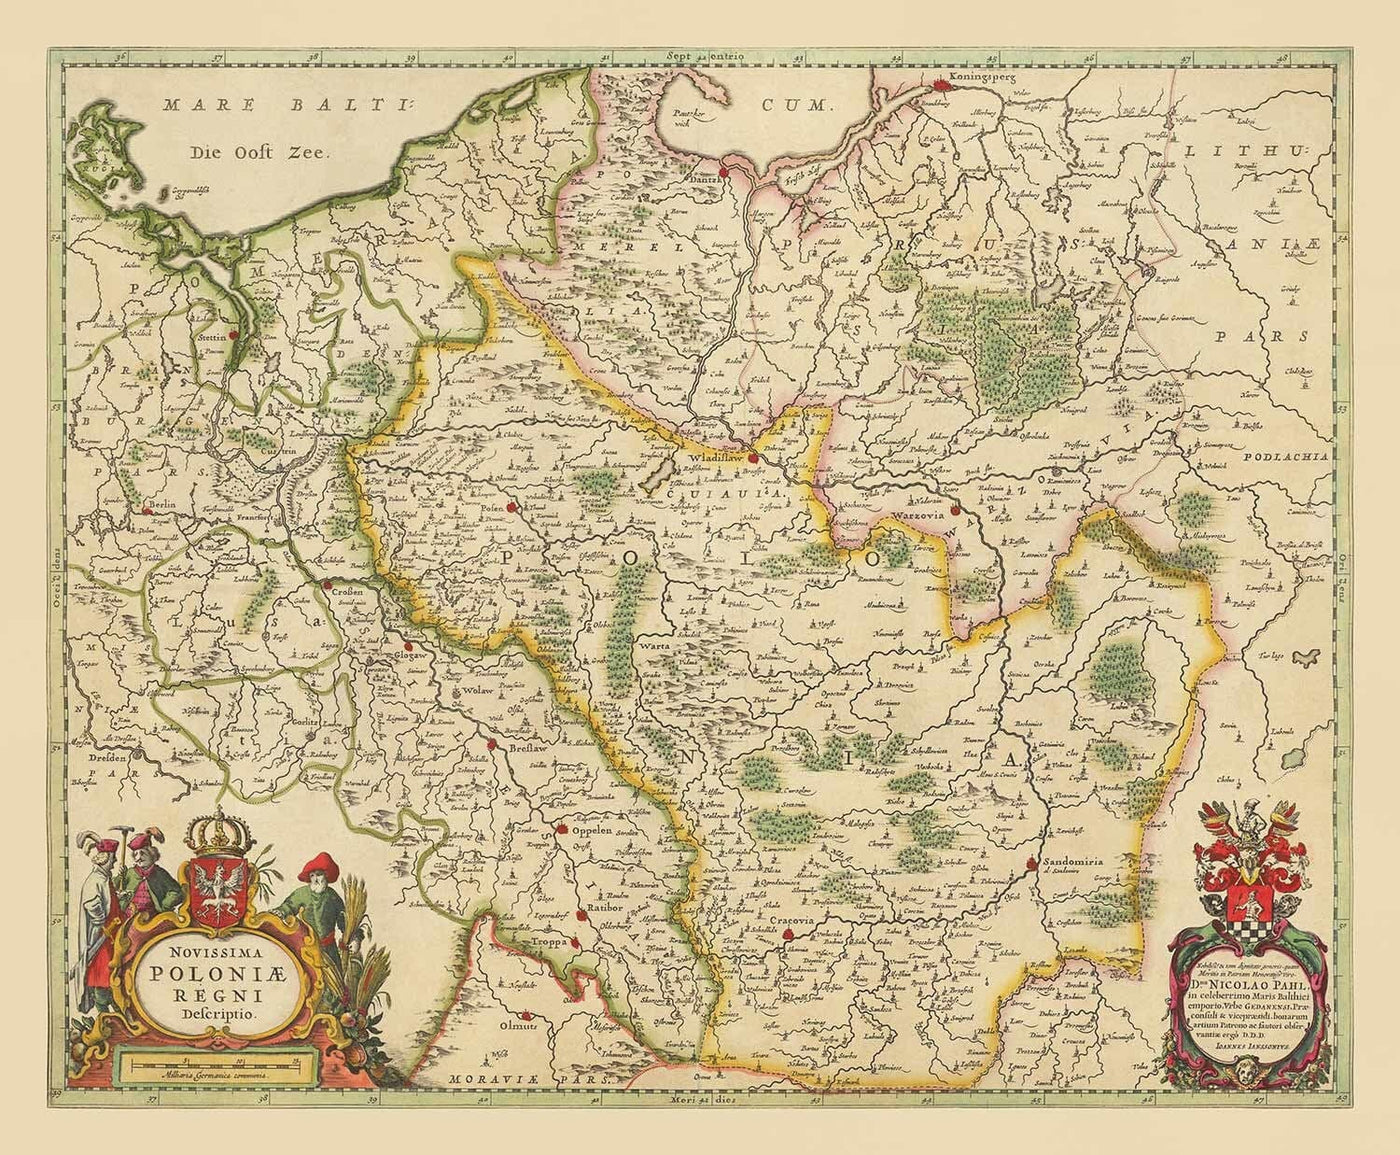 Old Map of Poland by Jan Jansson, 1640 - Germany, Prussia, Lithuania, Silesia, Lusatia, Warsaw, Berlin, Krakow